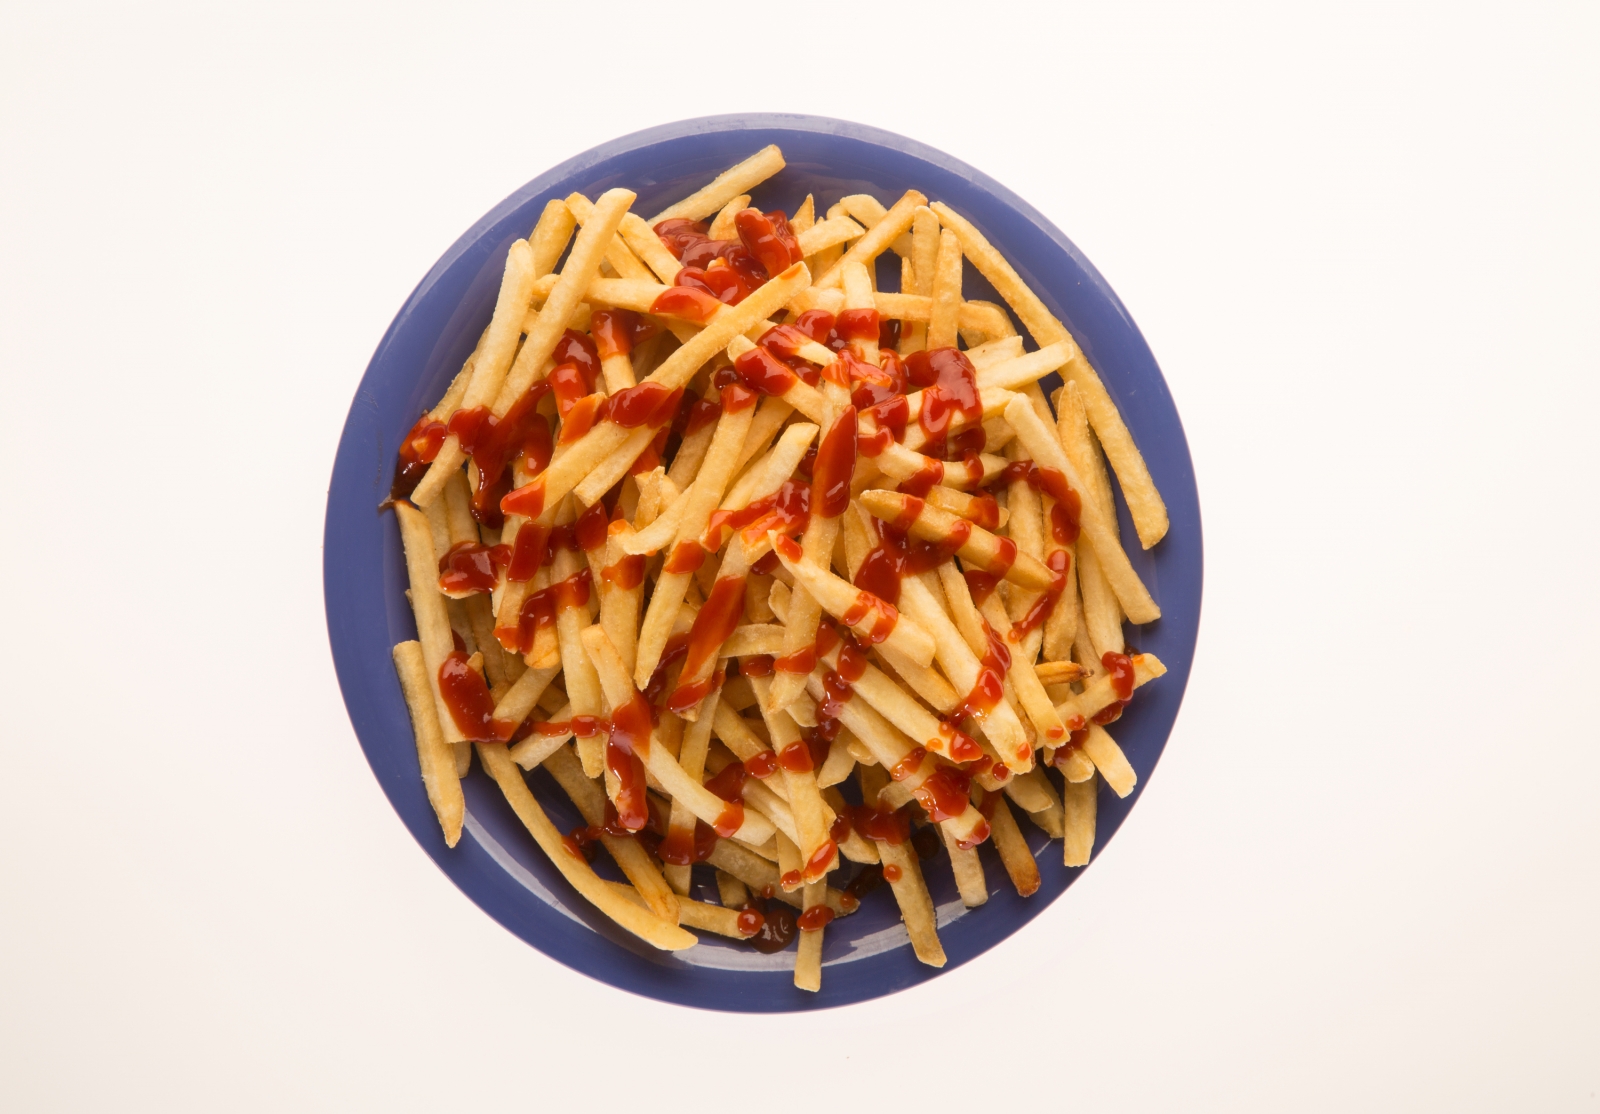 a plate of french fries with ketchup